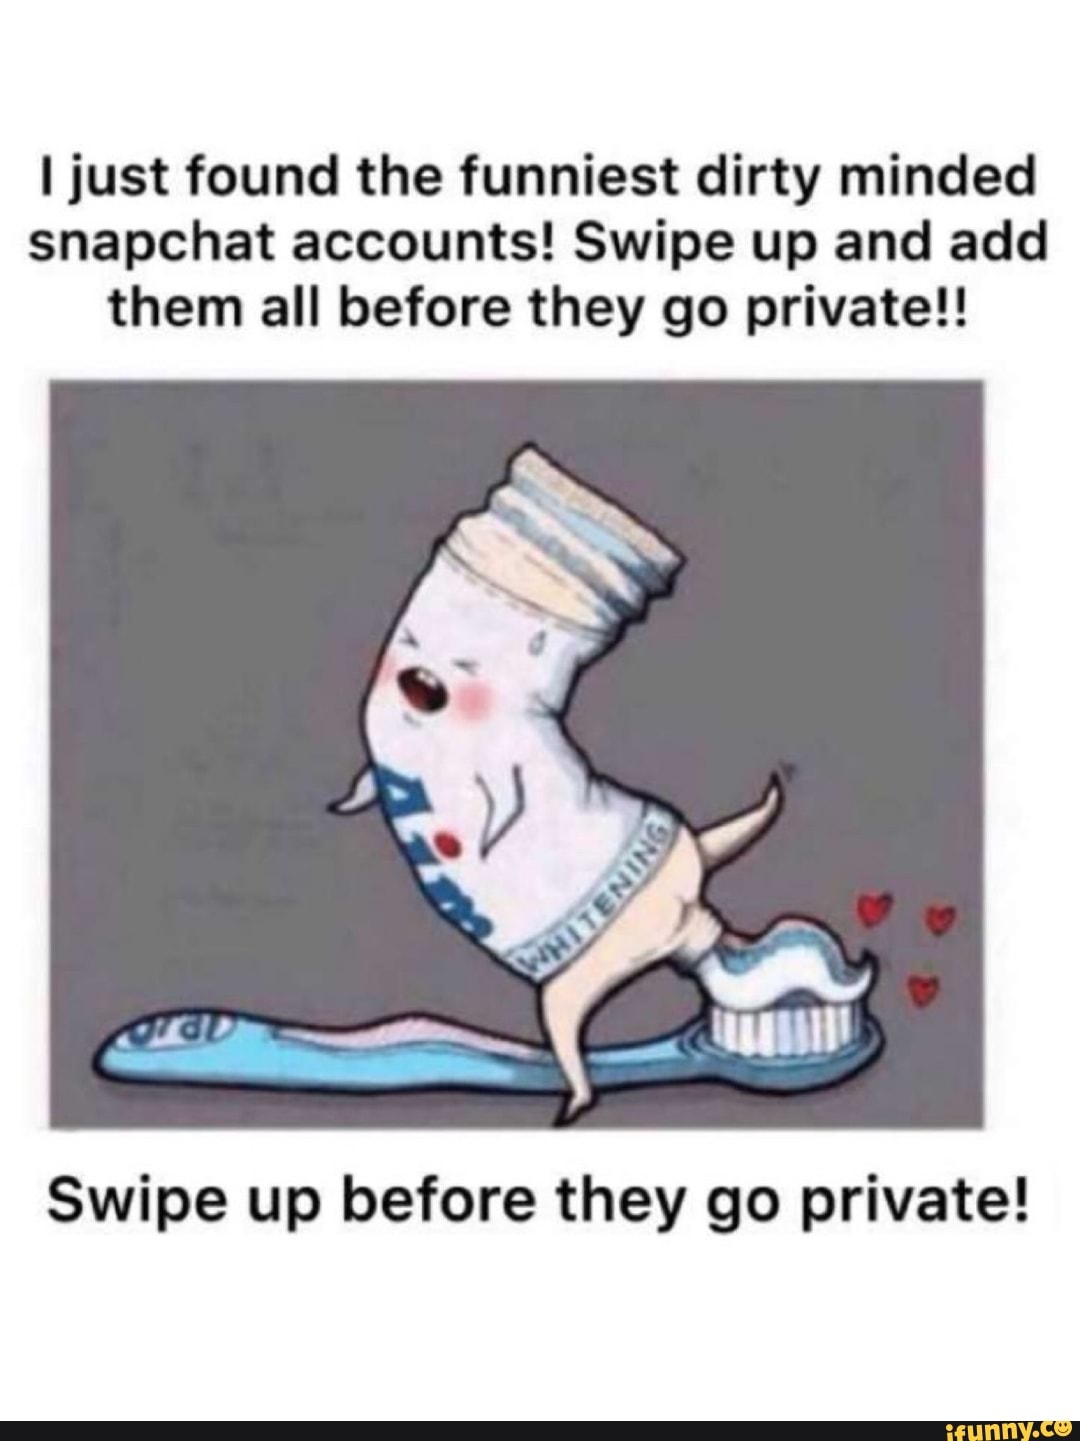 I just found the funniest dirty minded snapchat accounts! Swipe up and add  them all before they go private!! 